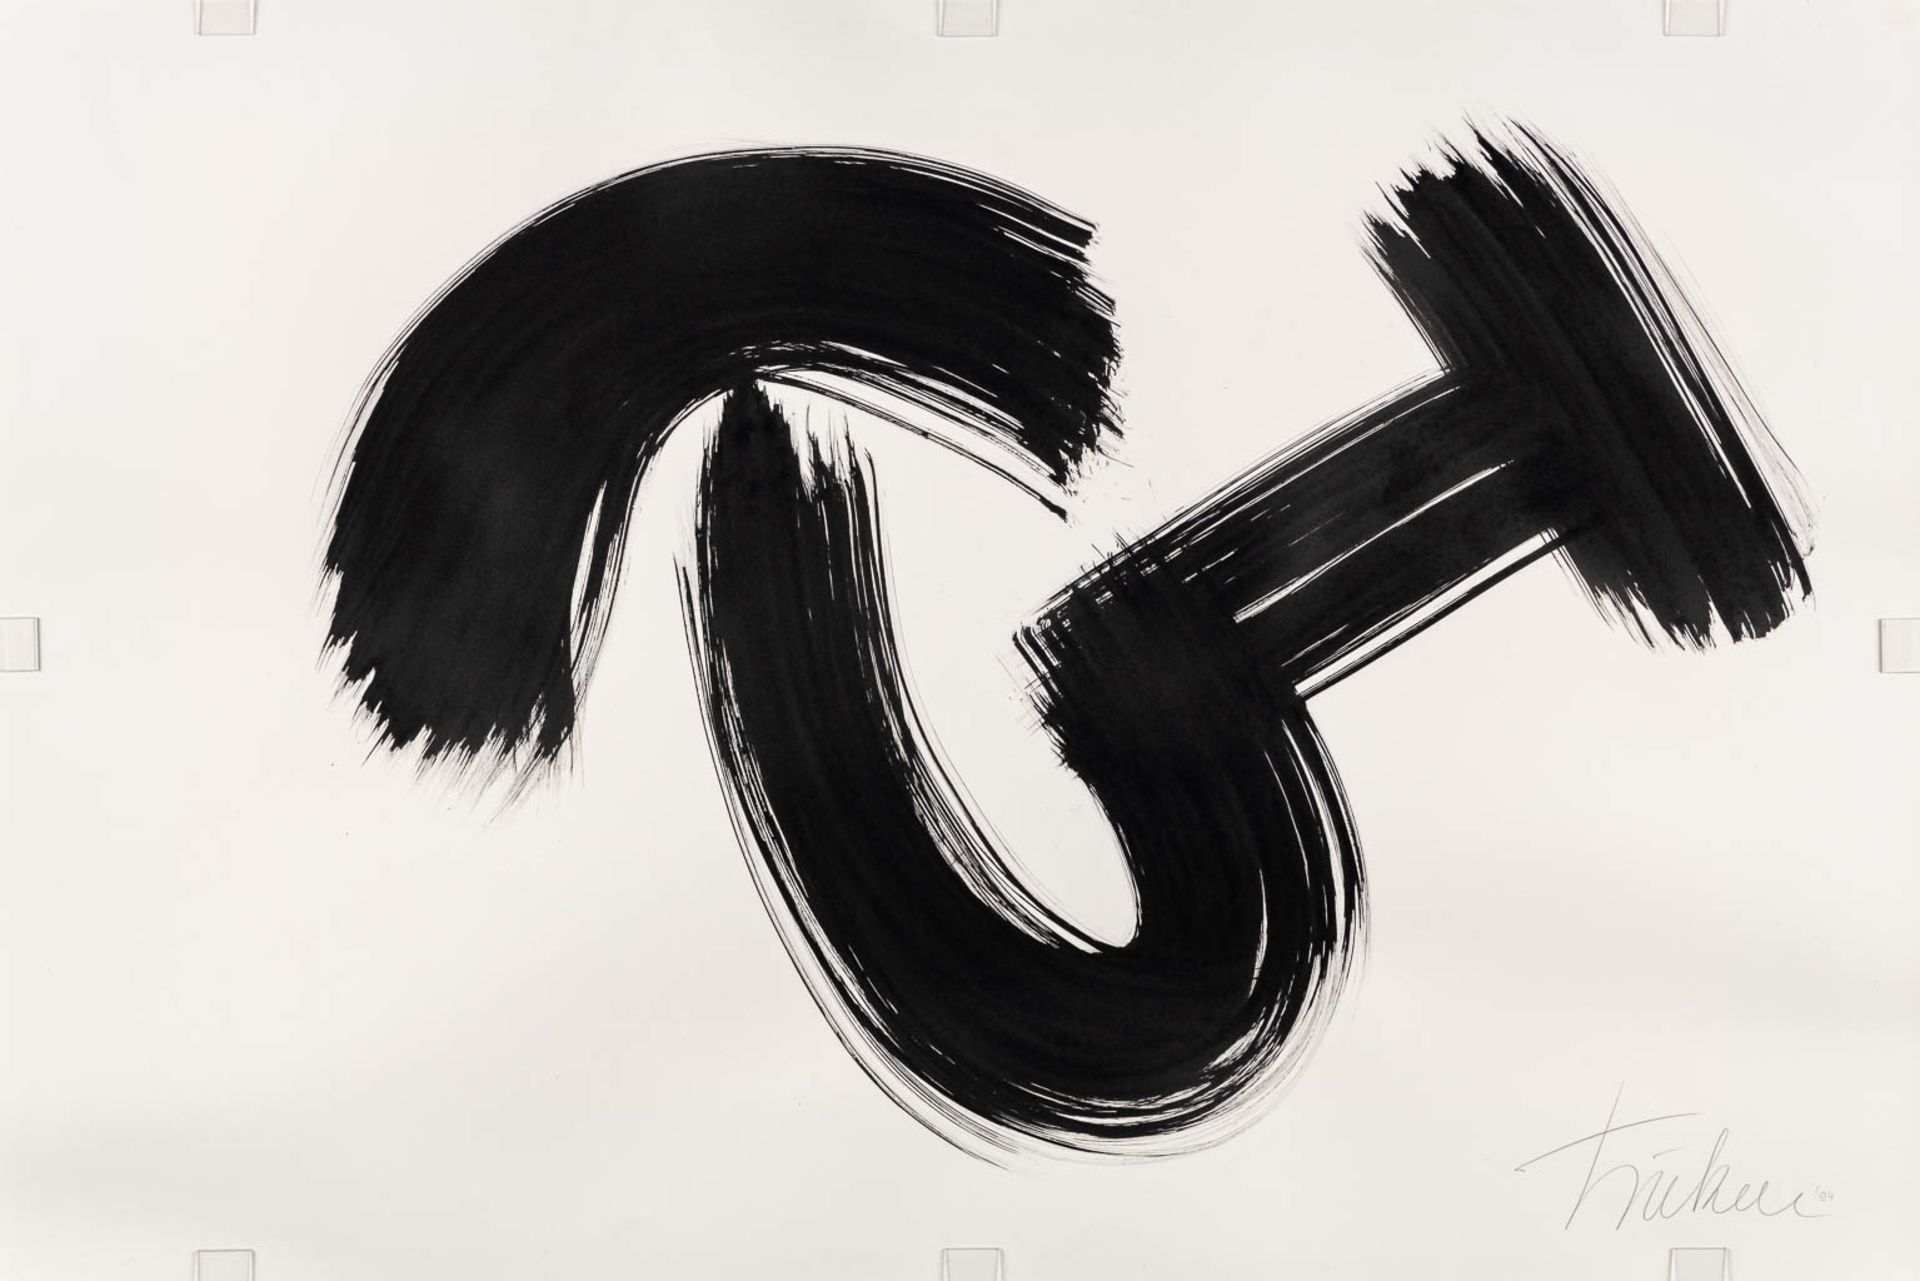 TSUKAI (XX) 'Calligraphy' eastern Indian ink on paper. (W:95 x H:64 cm) - Image 3 of 6